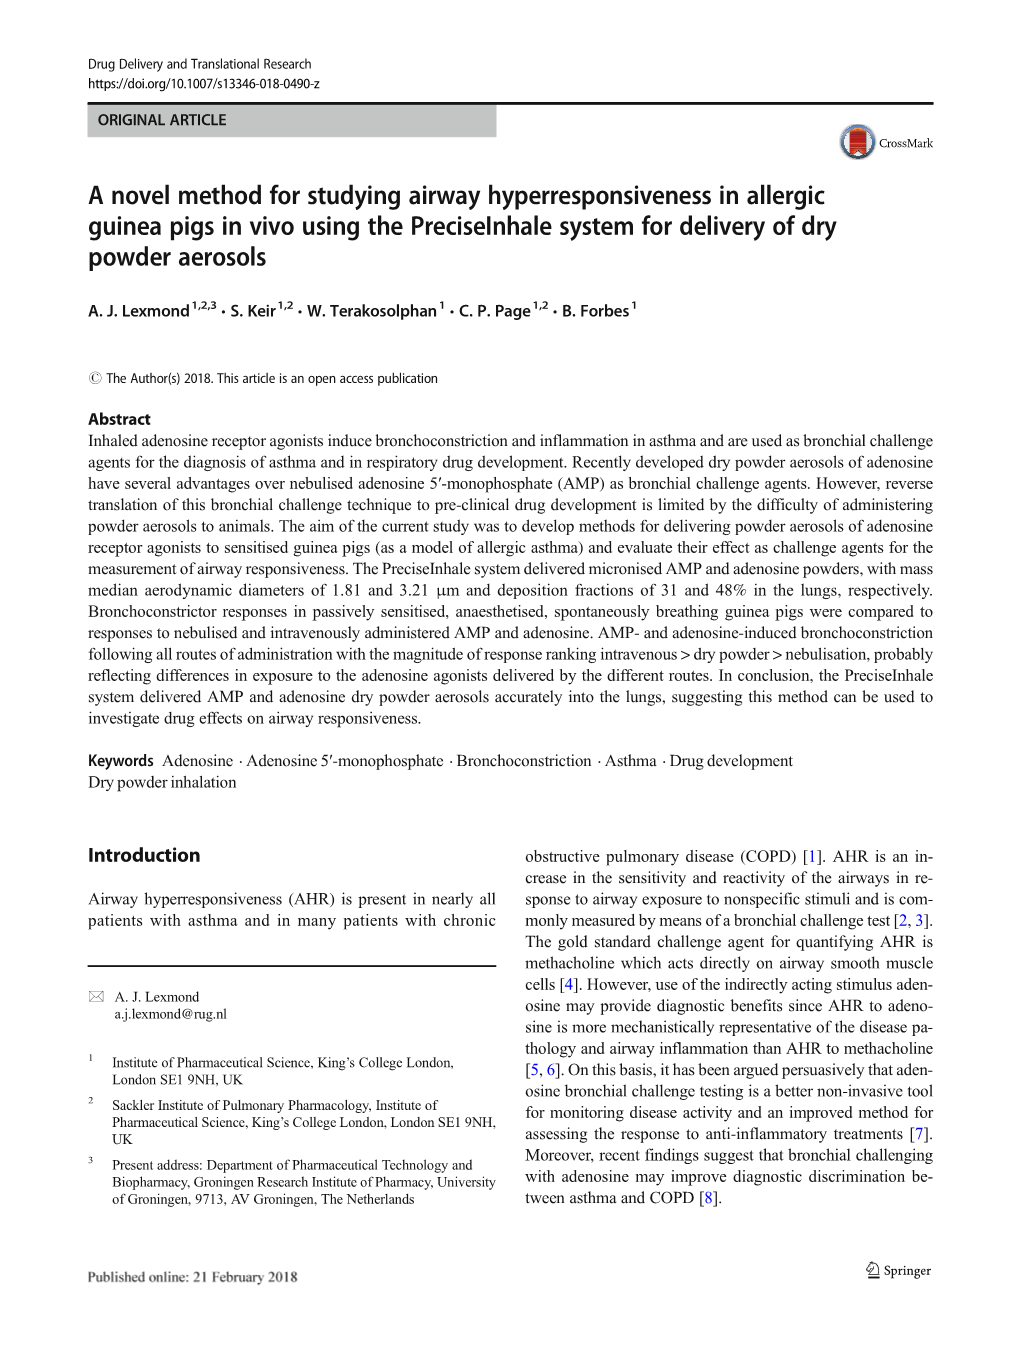 A Novel Method for Studying Airway Hyperresponsiveness in Allergic Guinea Pigs in Vivo Using the Preciseinhale System for Delivery of Dry Powder Aerosols